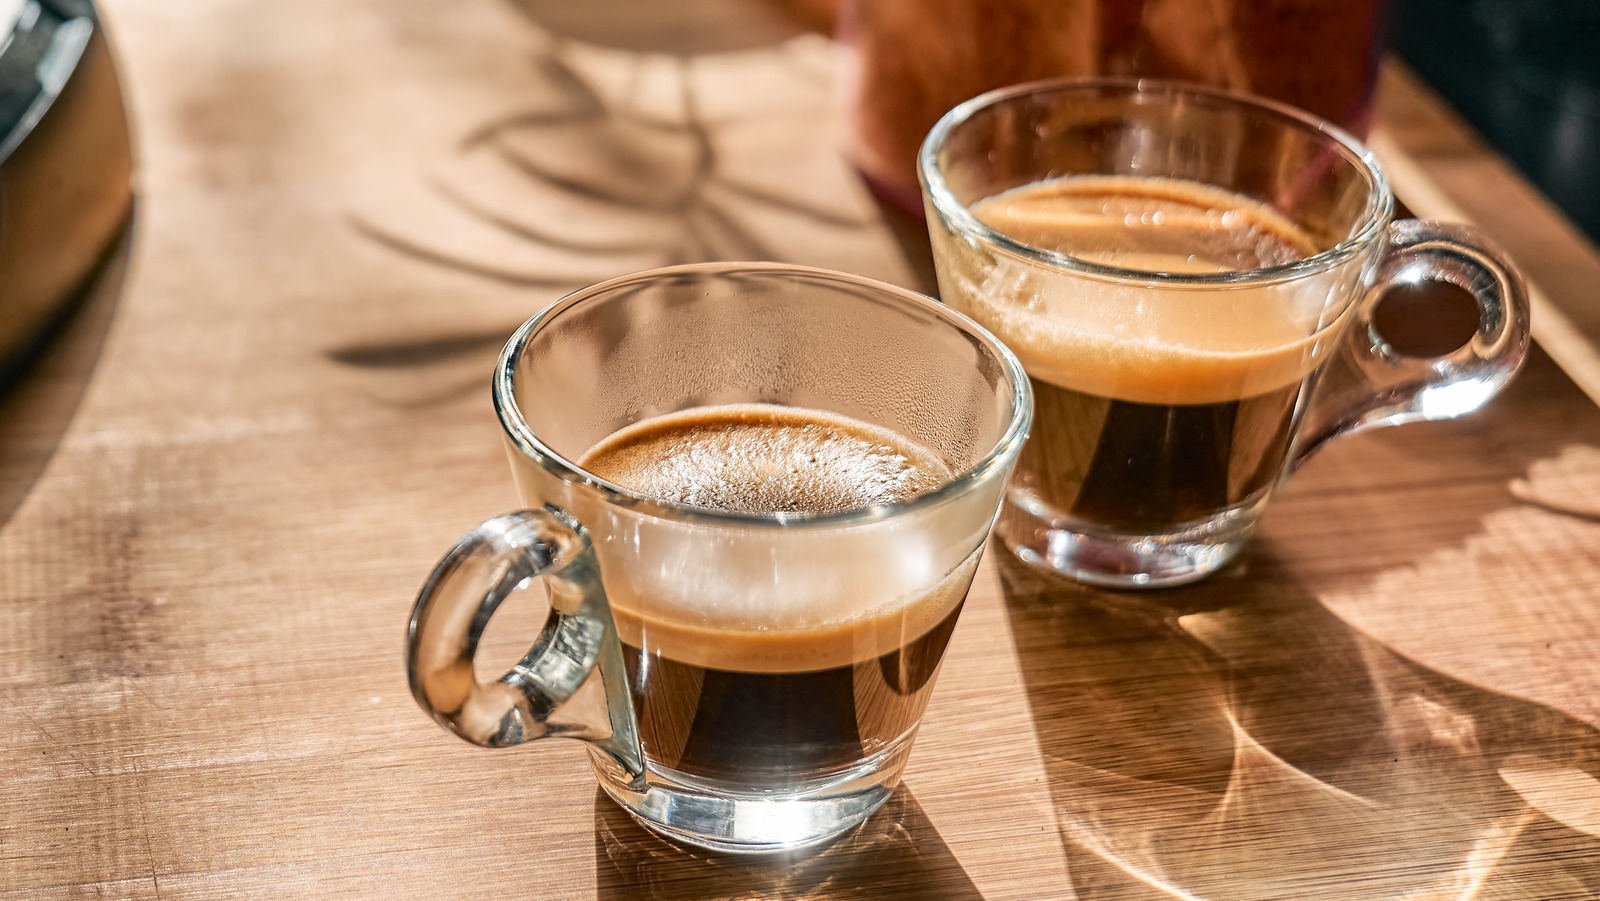 https://www.tastingtable.com/img/gallery/what-to-consider-before-sipping-espresso-out-of-a-glass-cup/l-intro-1682040190.jpg